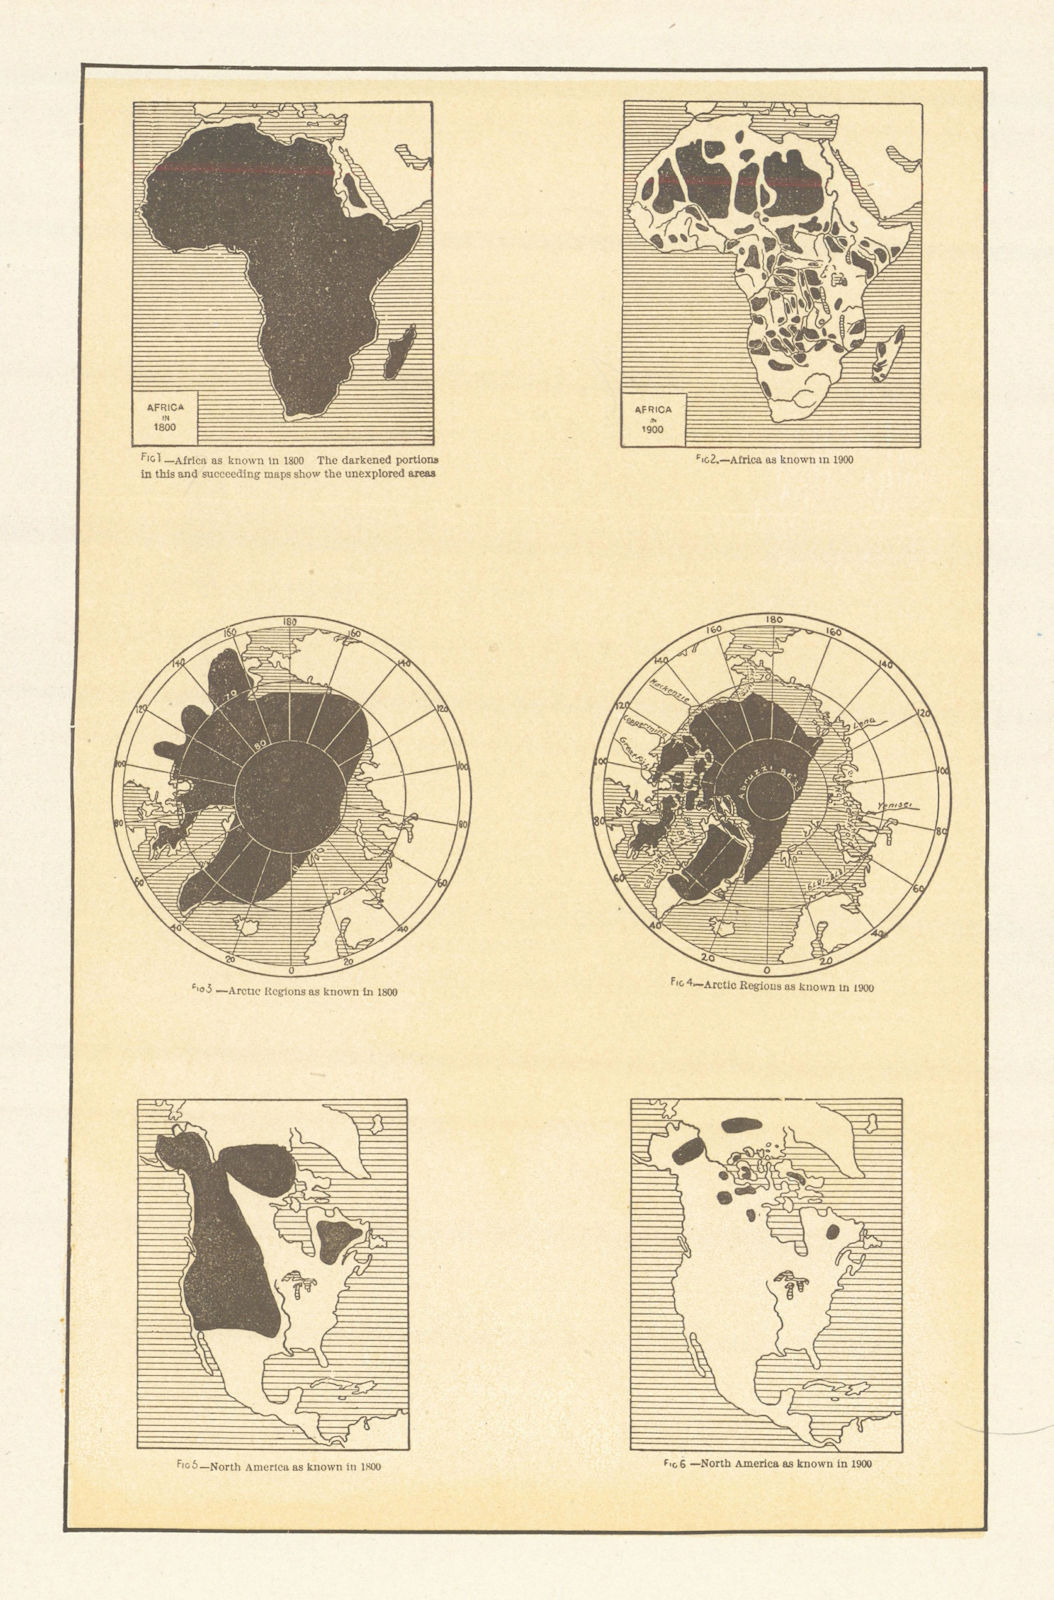 Associate Product Africa Arctic & North America known/unknwon regions in 1800 & 1900 1907 map